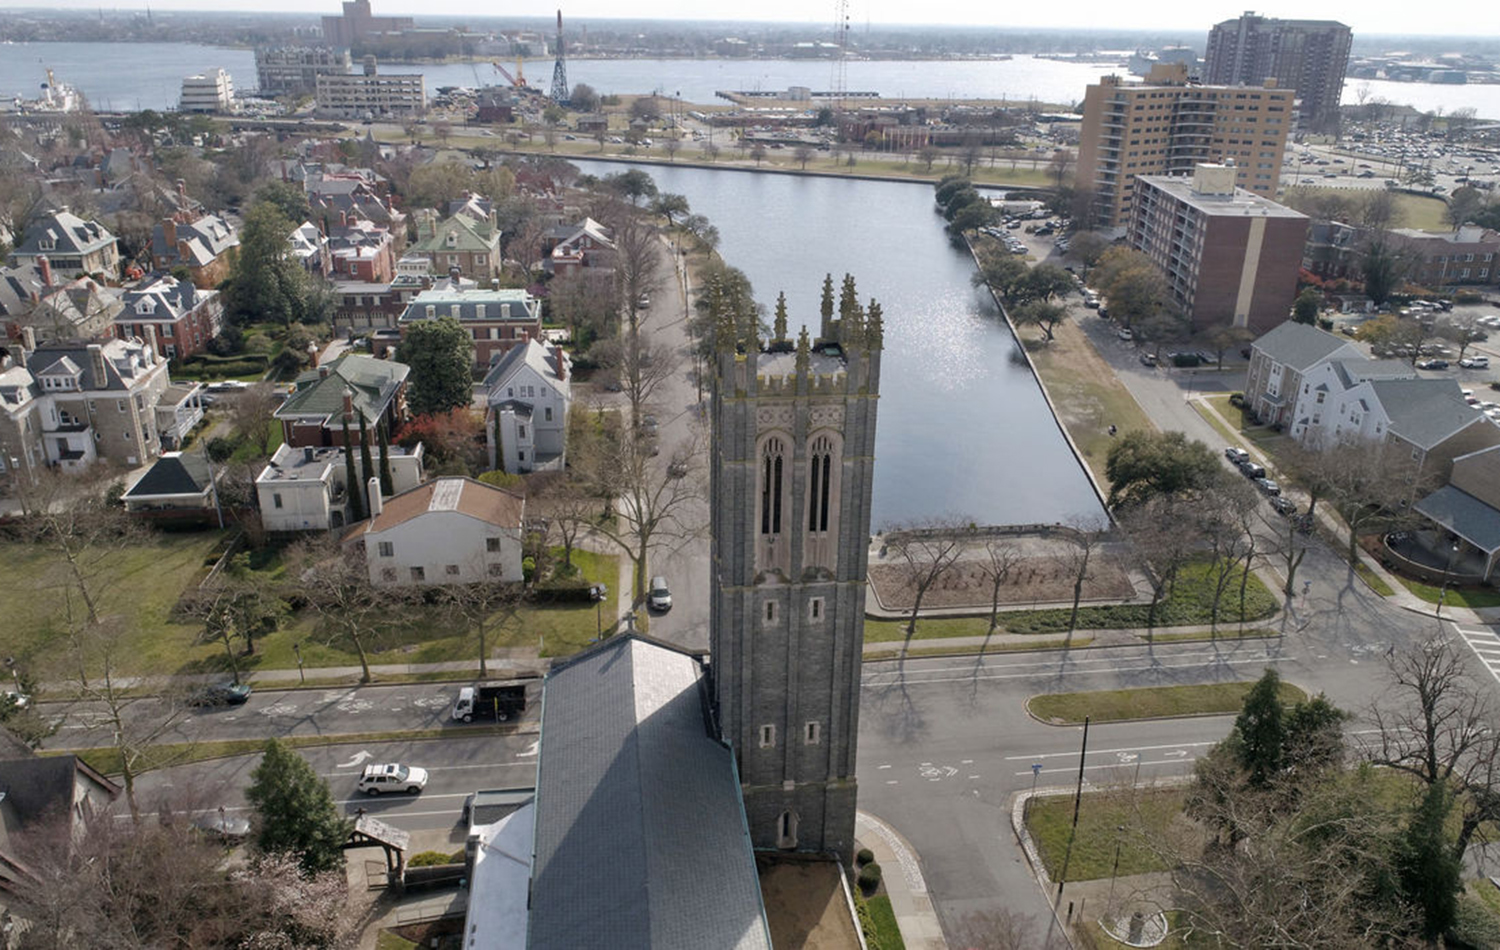  Christ &amp; St. Luke's Episcopal Church in Norfolk stands just across the street from the flood-prone Hague. 